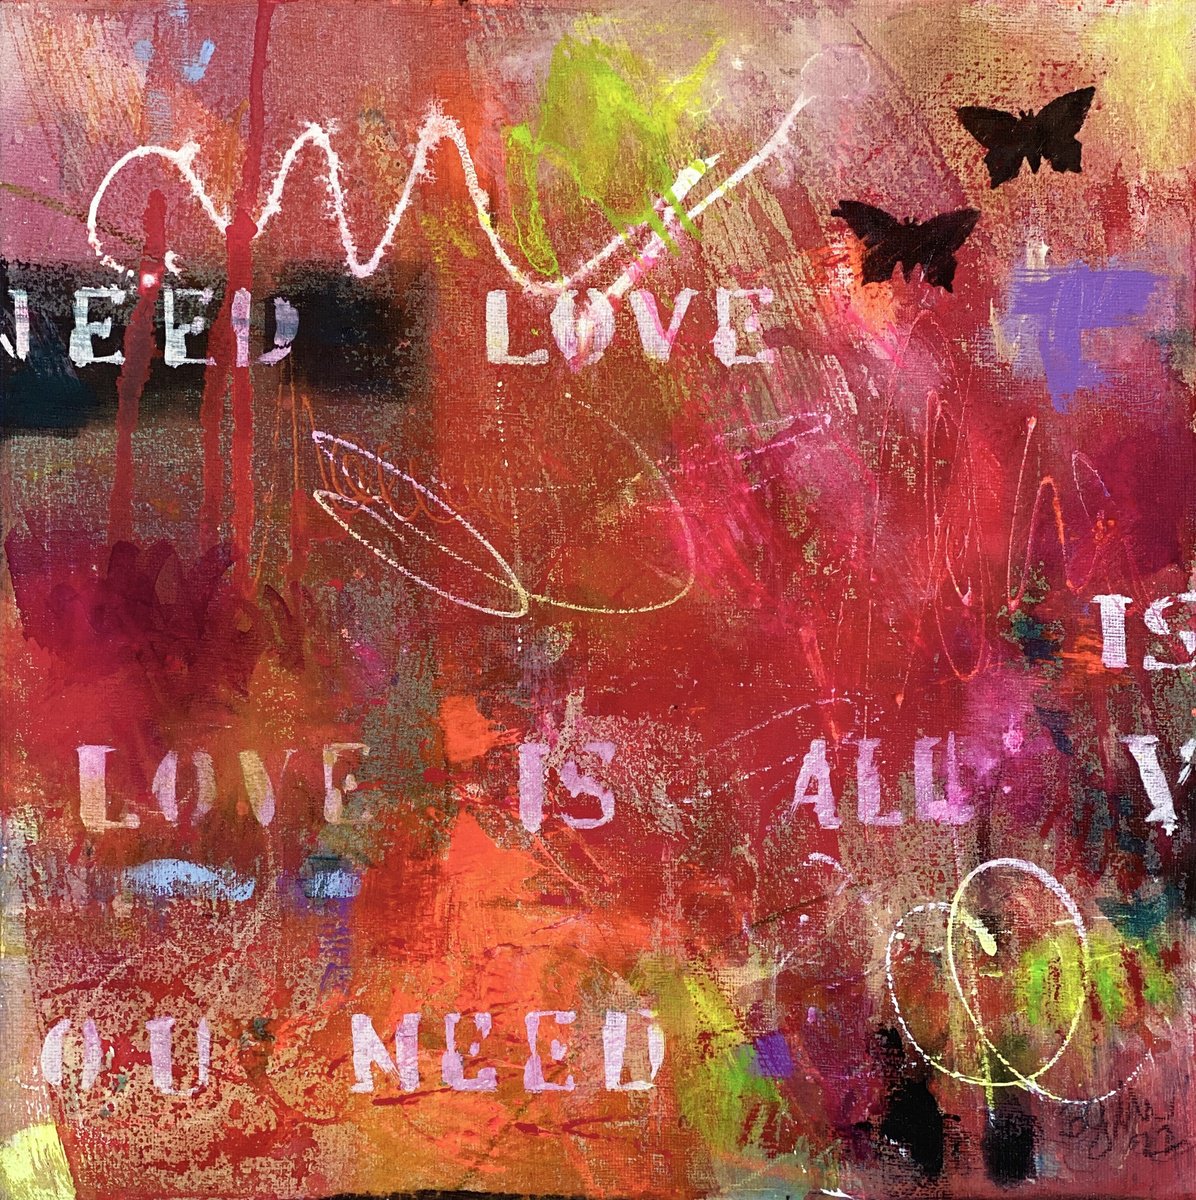 All You Need Is Love No.13 by Bea Garding Schubert